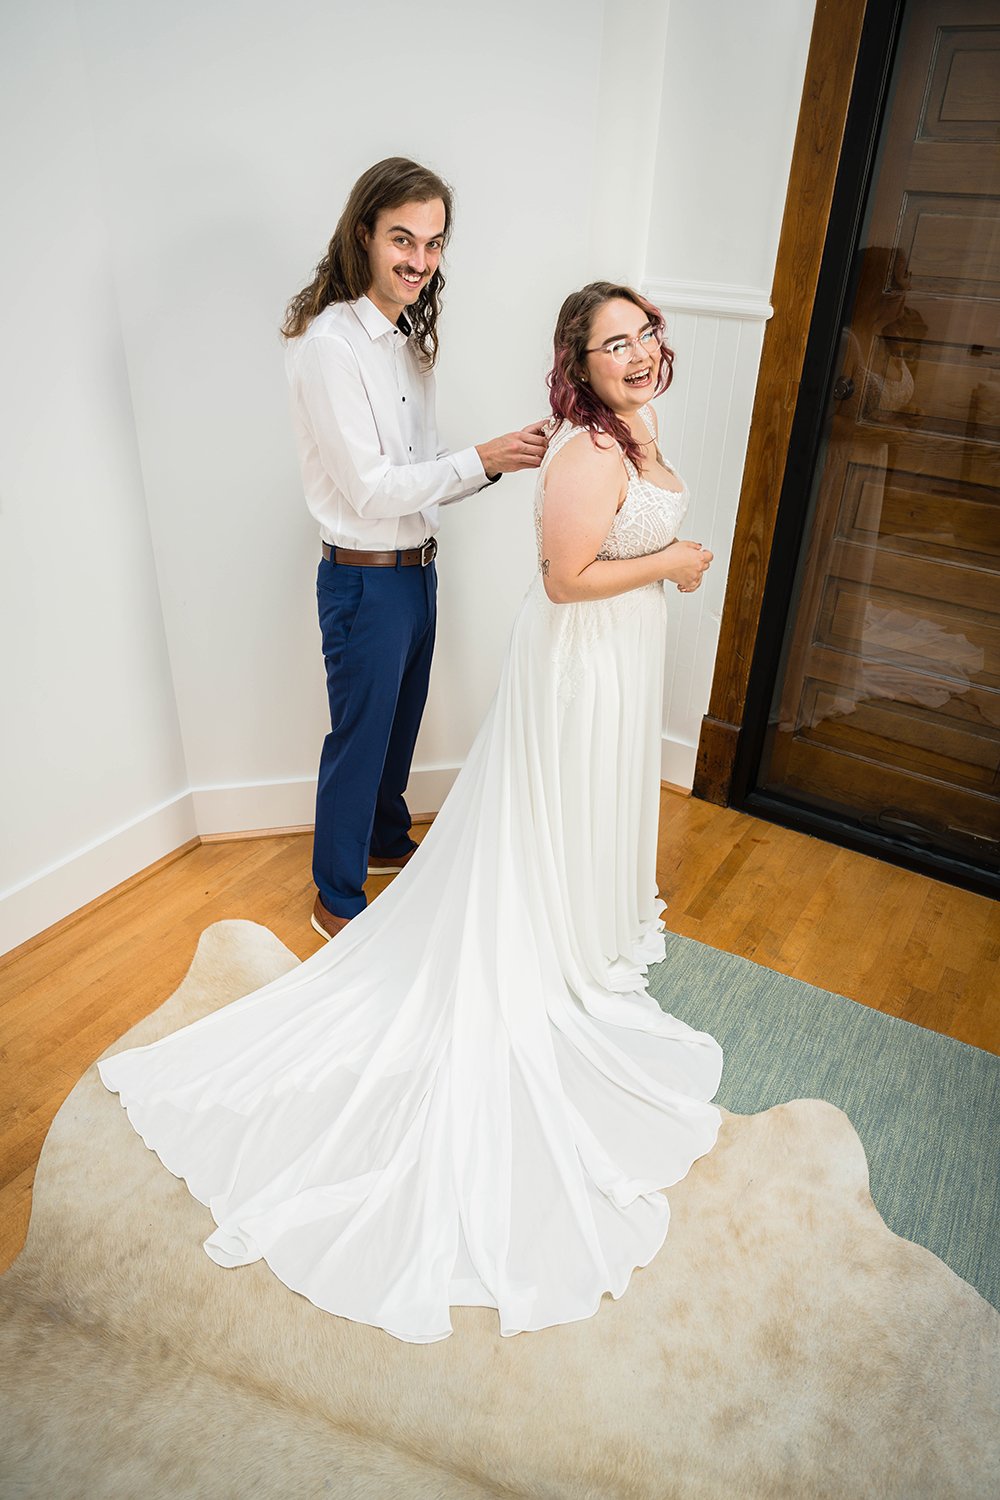 A wedding couple getting ready together in the Cottage Room in Fire Station One in Roanoke, Virginia prior to their elopement ceremony.